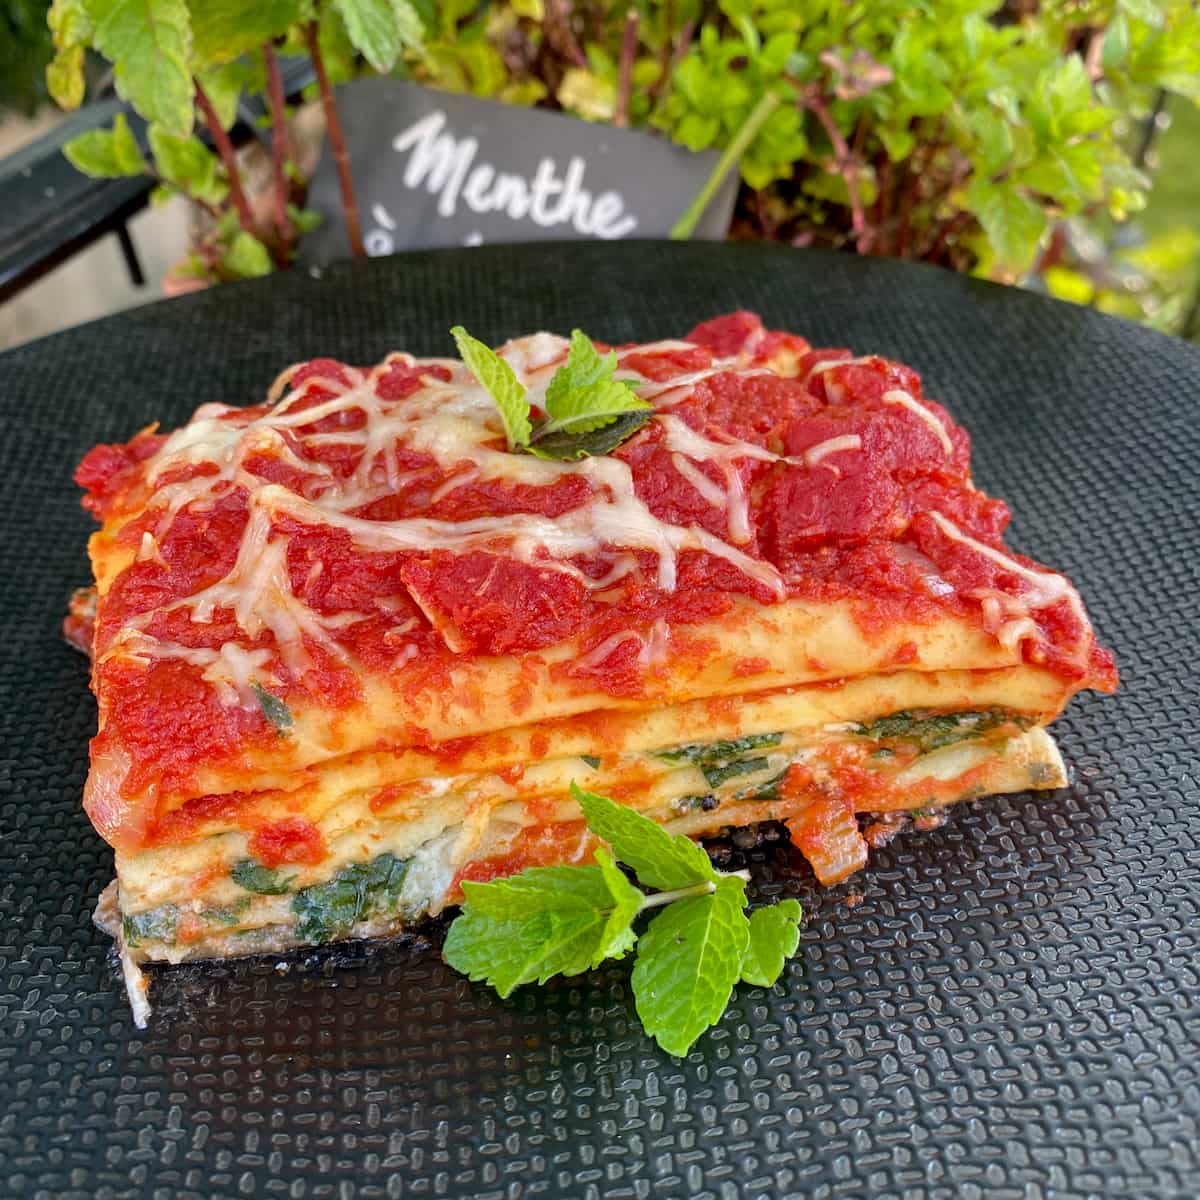 layers of lasagna with cheese, spinach, tomato and mint